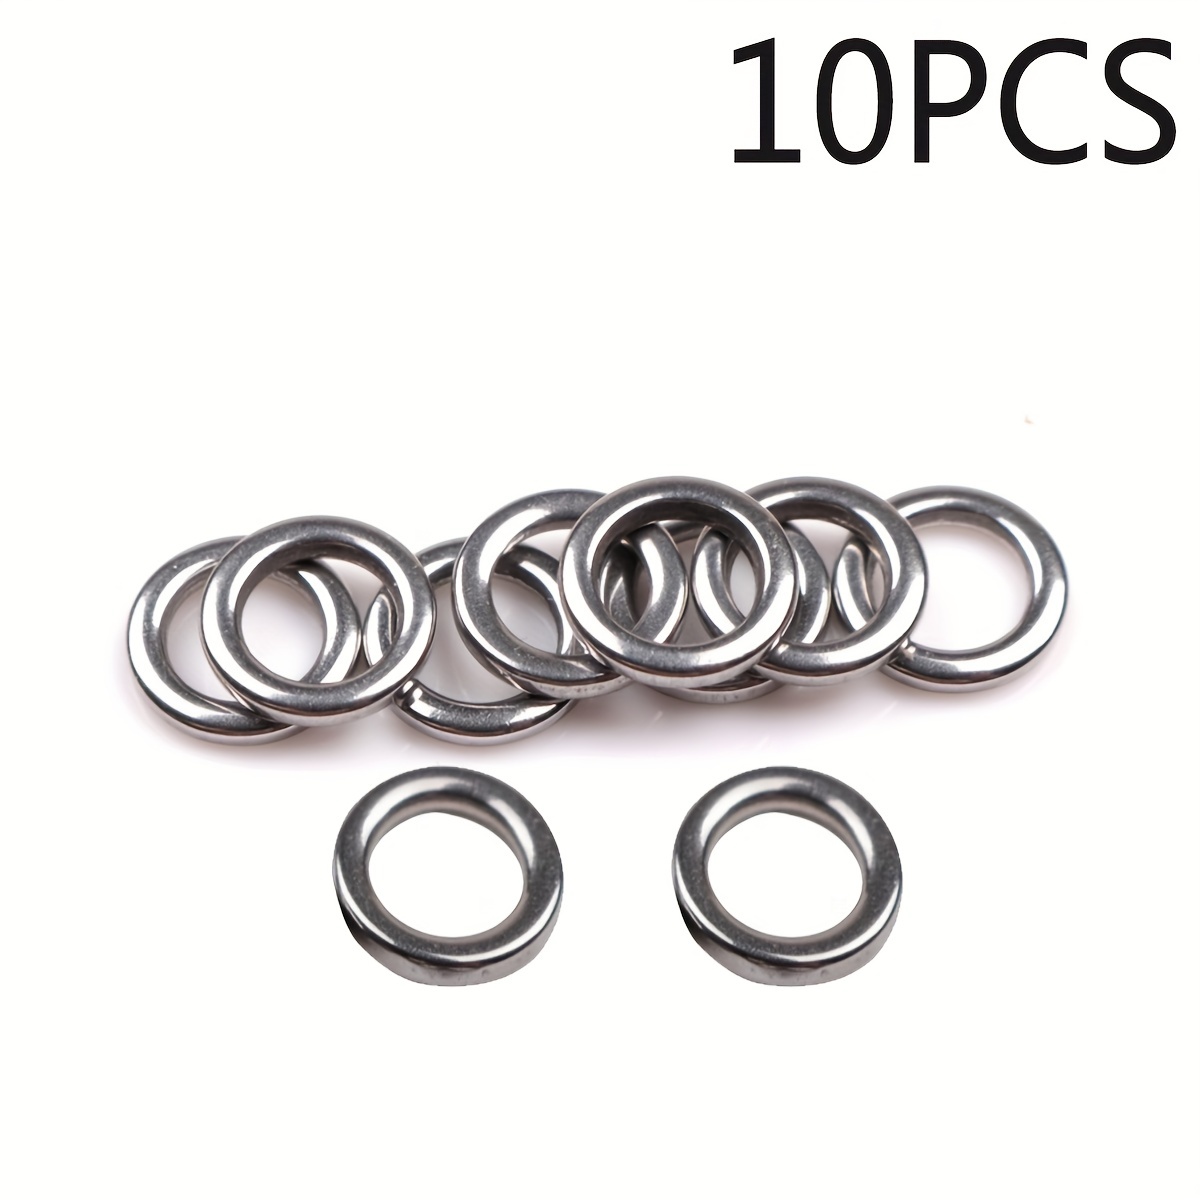 10pcs Heavy Duty Stainless Steel Smooth Fishing Ring, Fish Kit Tackle  Swivel Connector, Jigging Saltwater Lures Baits Hooks, High Strength Solid  Rings